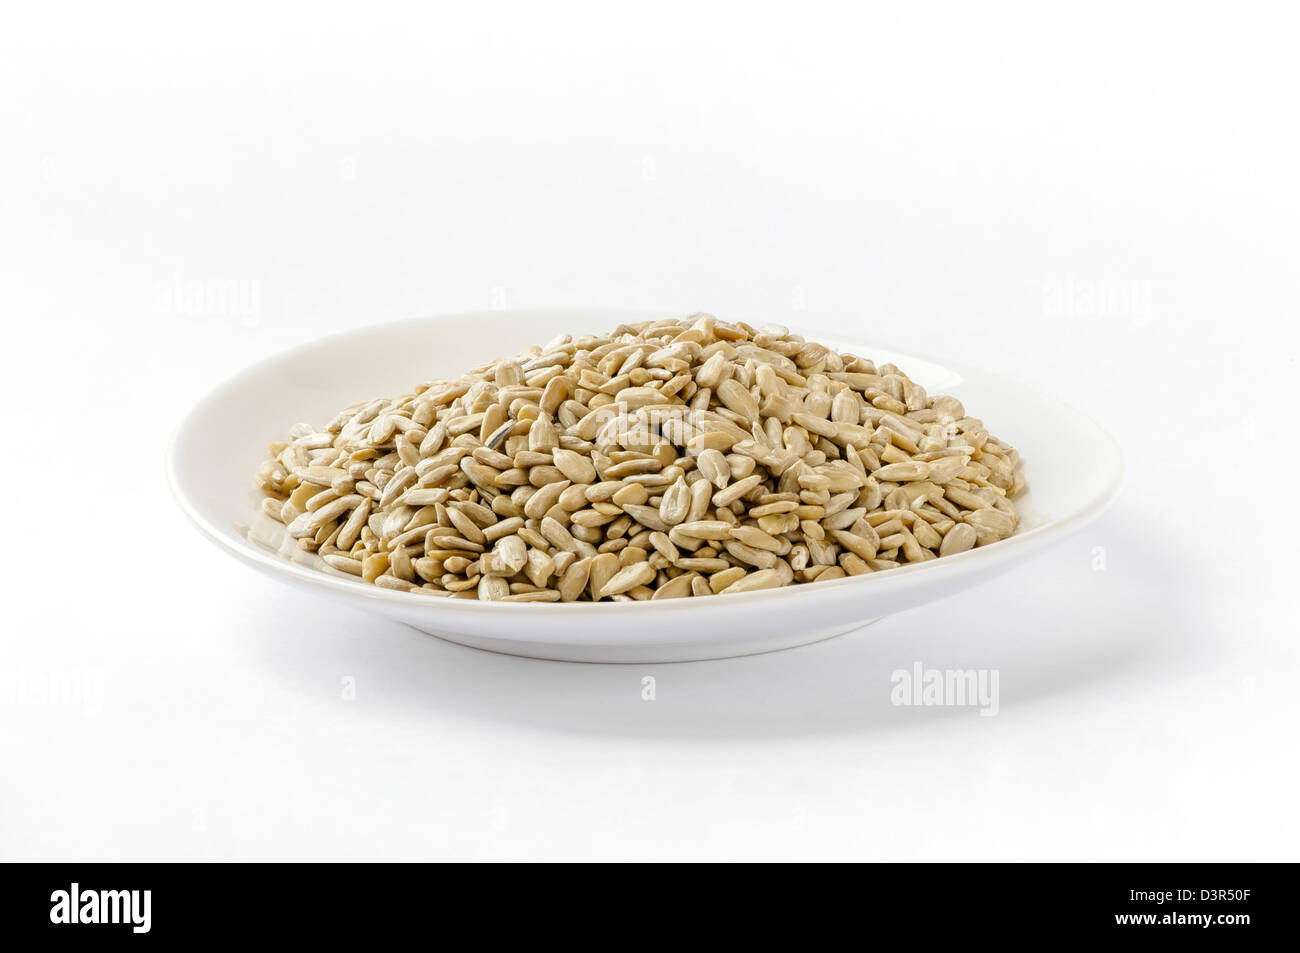 Sunflower seeds in a white plate, on white background Stock Photo